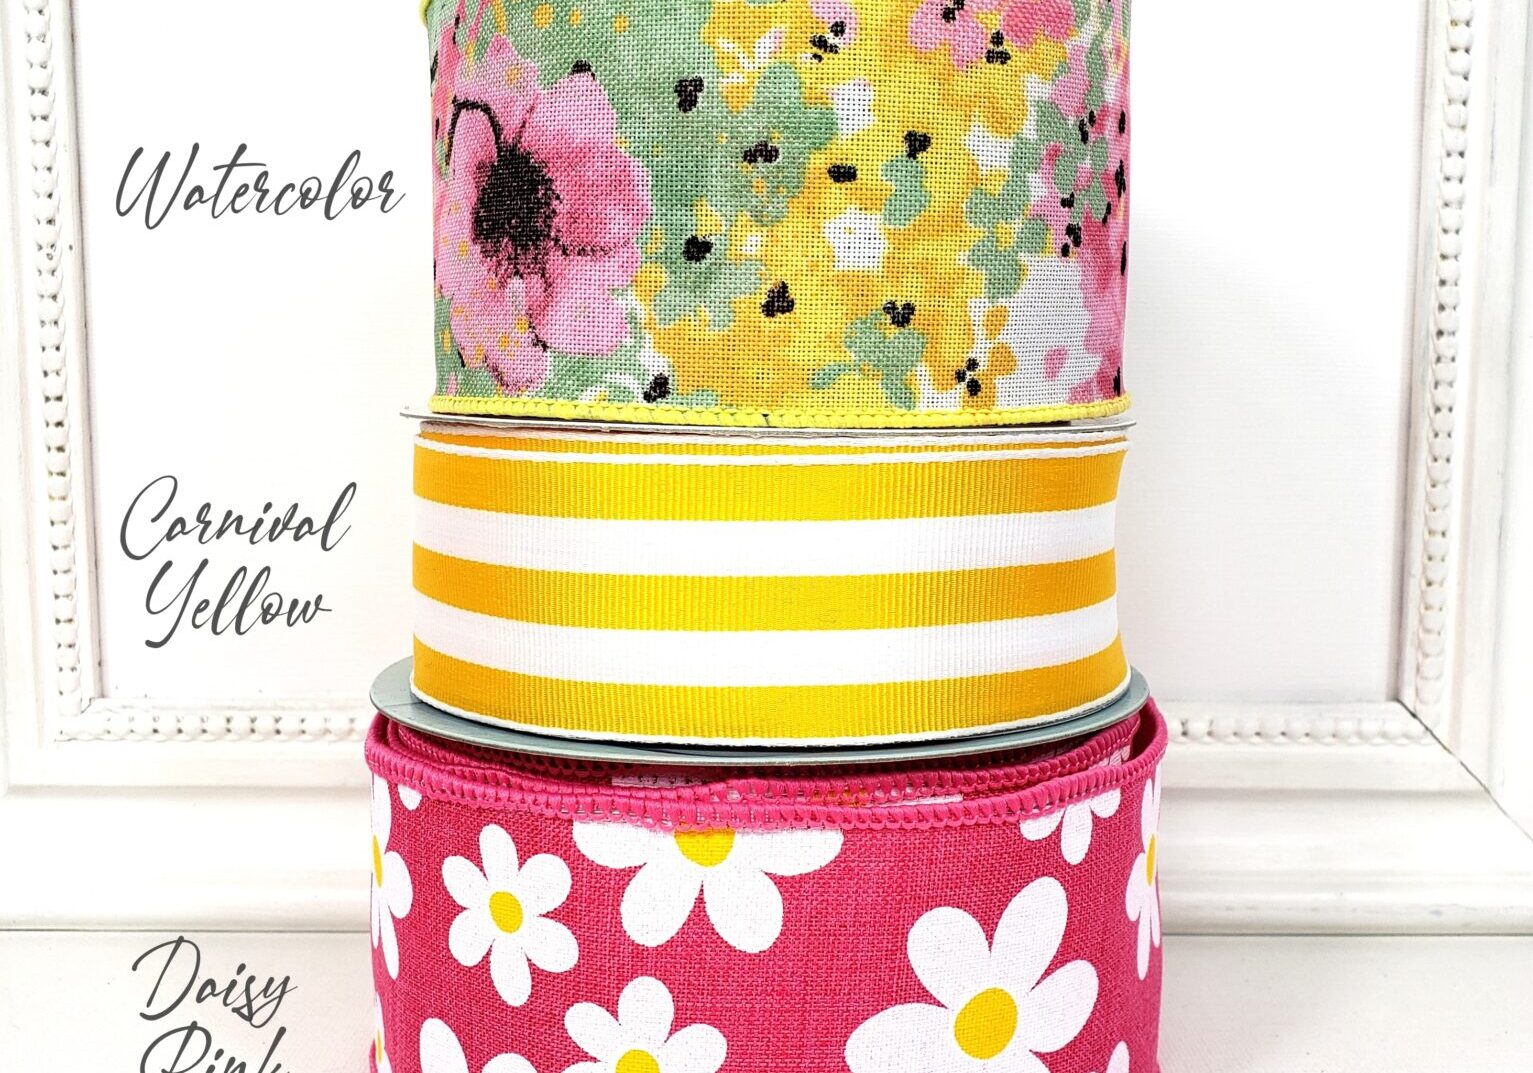 A stack of three different colored cake tins.